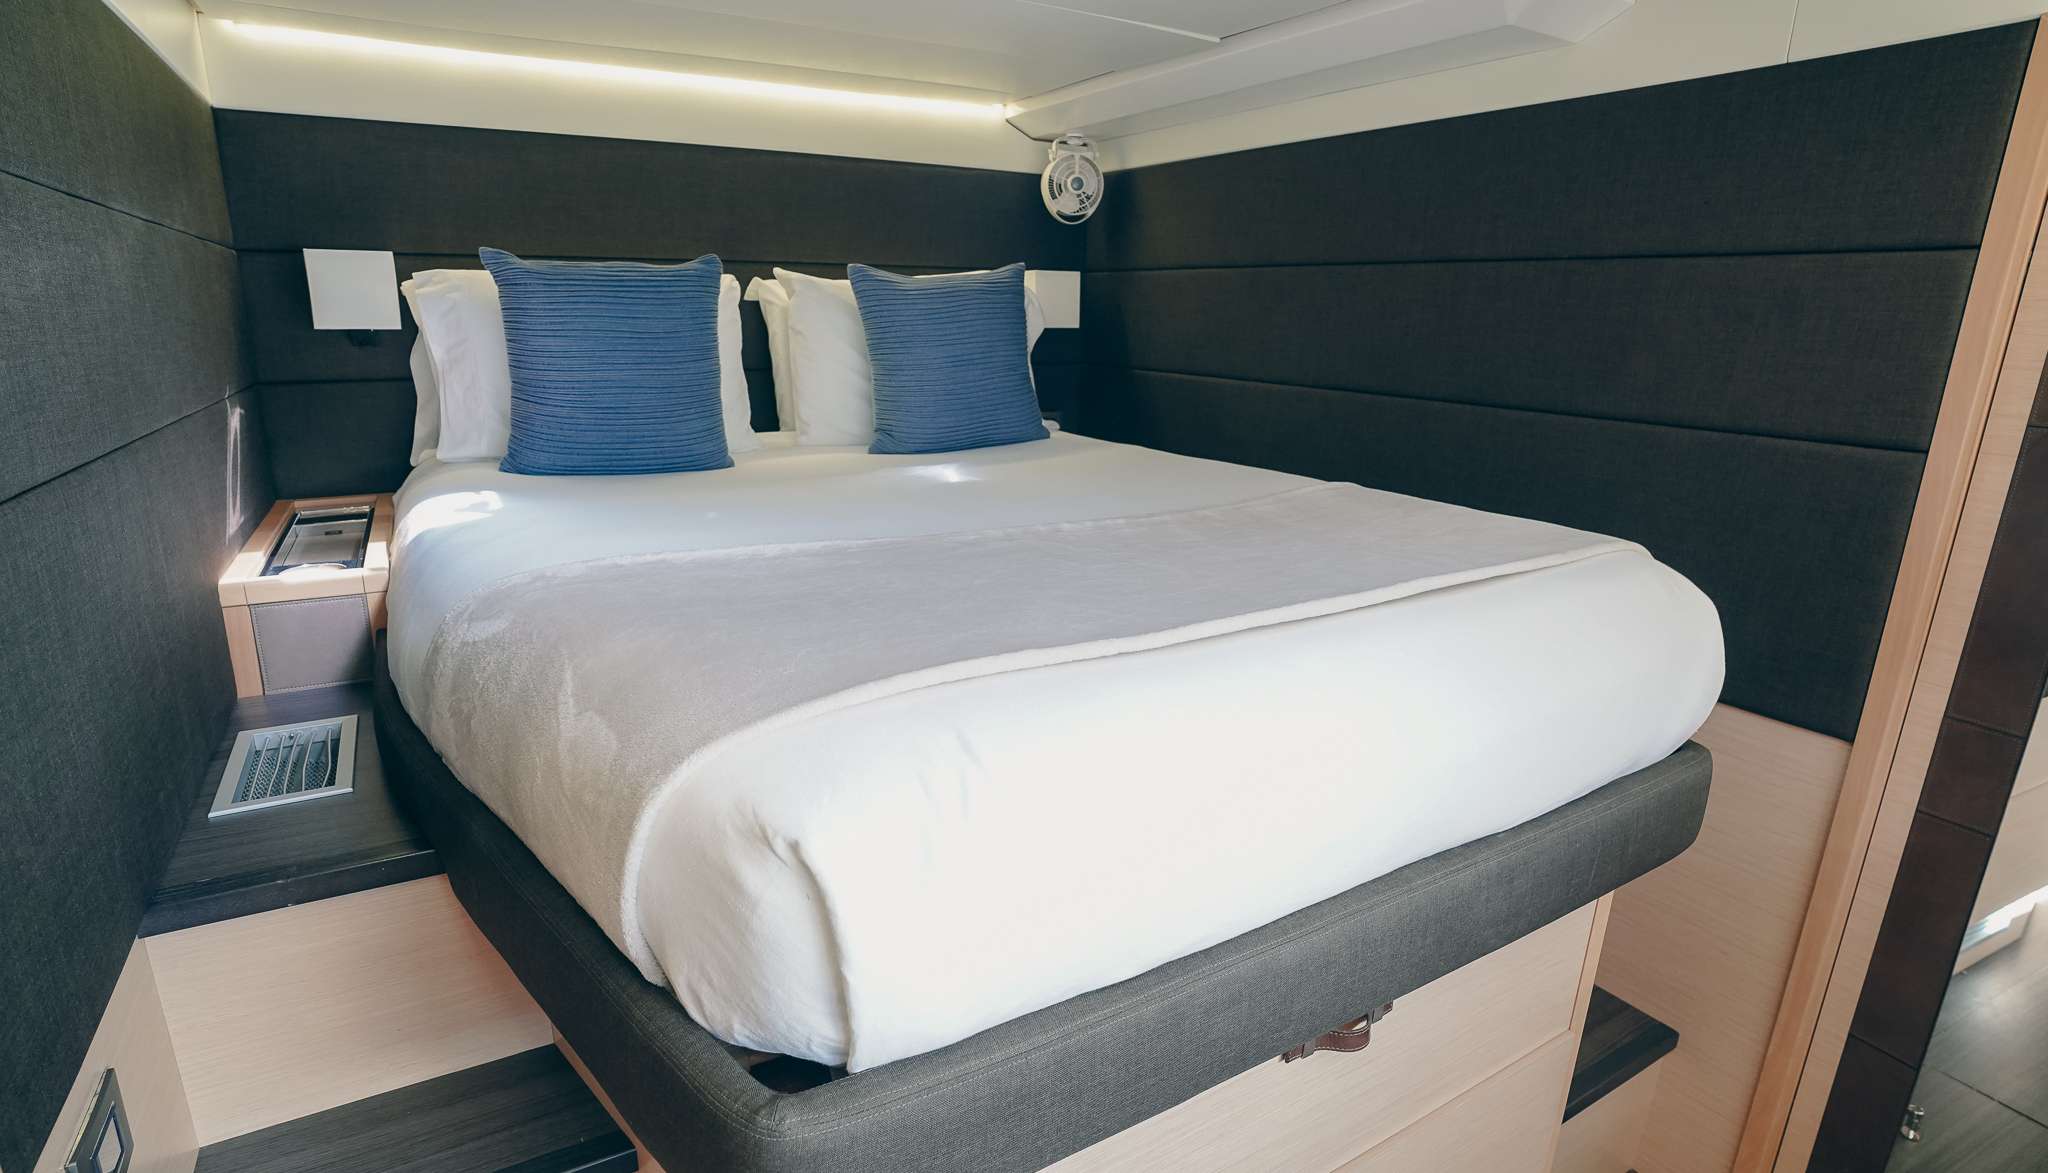 SEAHOME Yacht Charter - Queen guest cabin